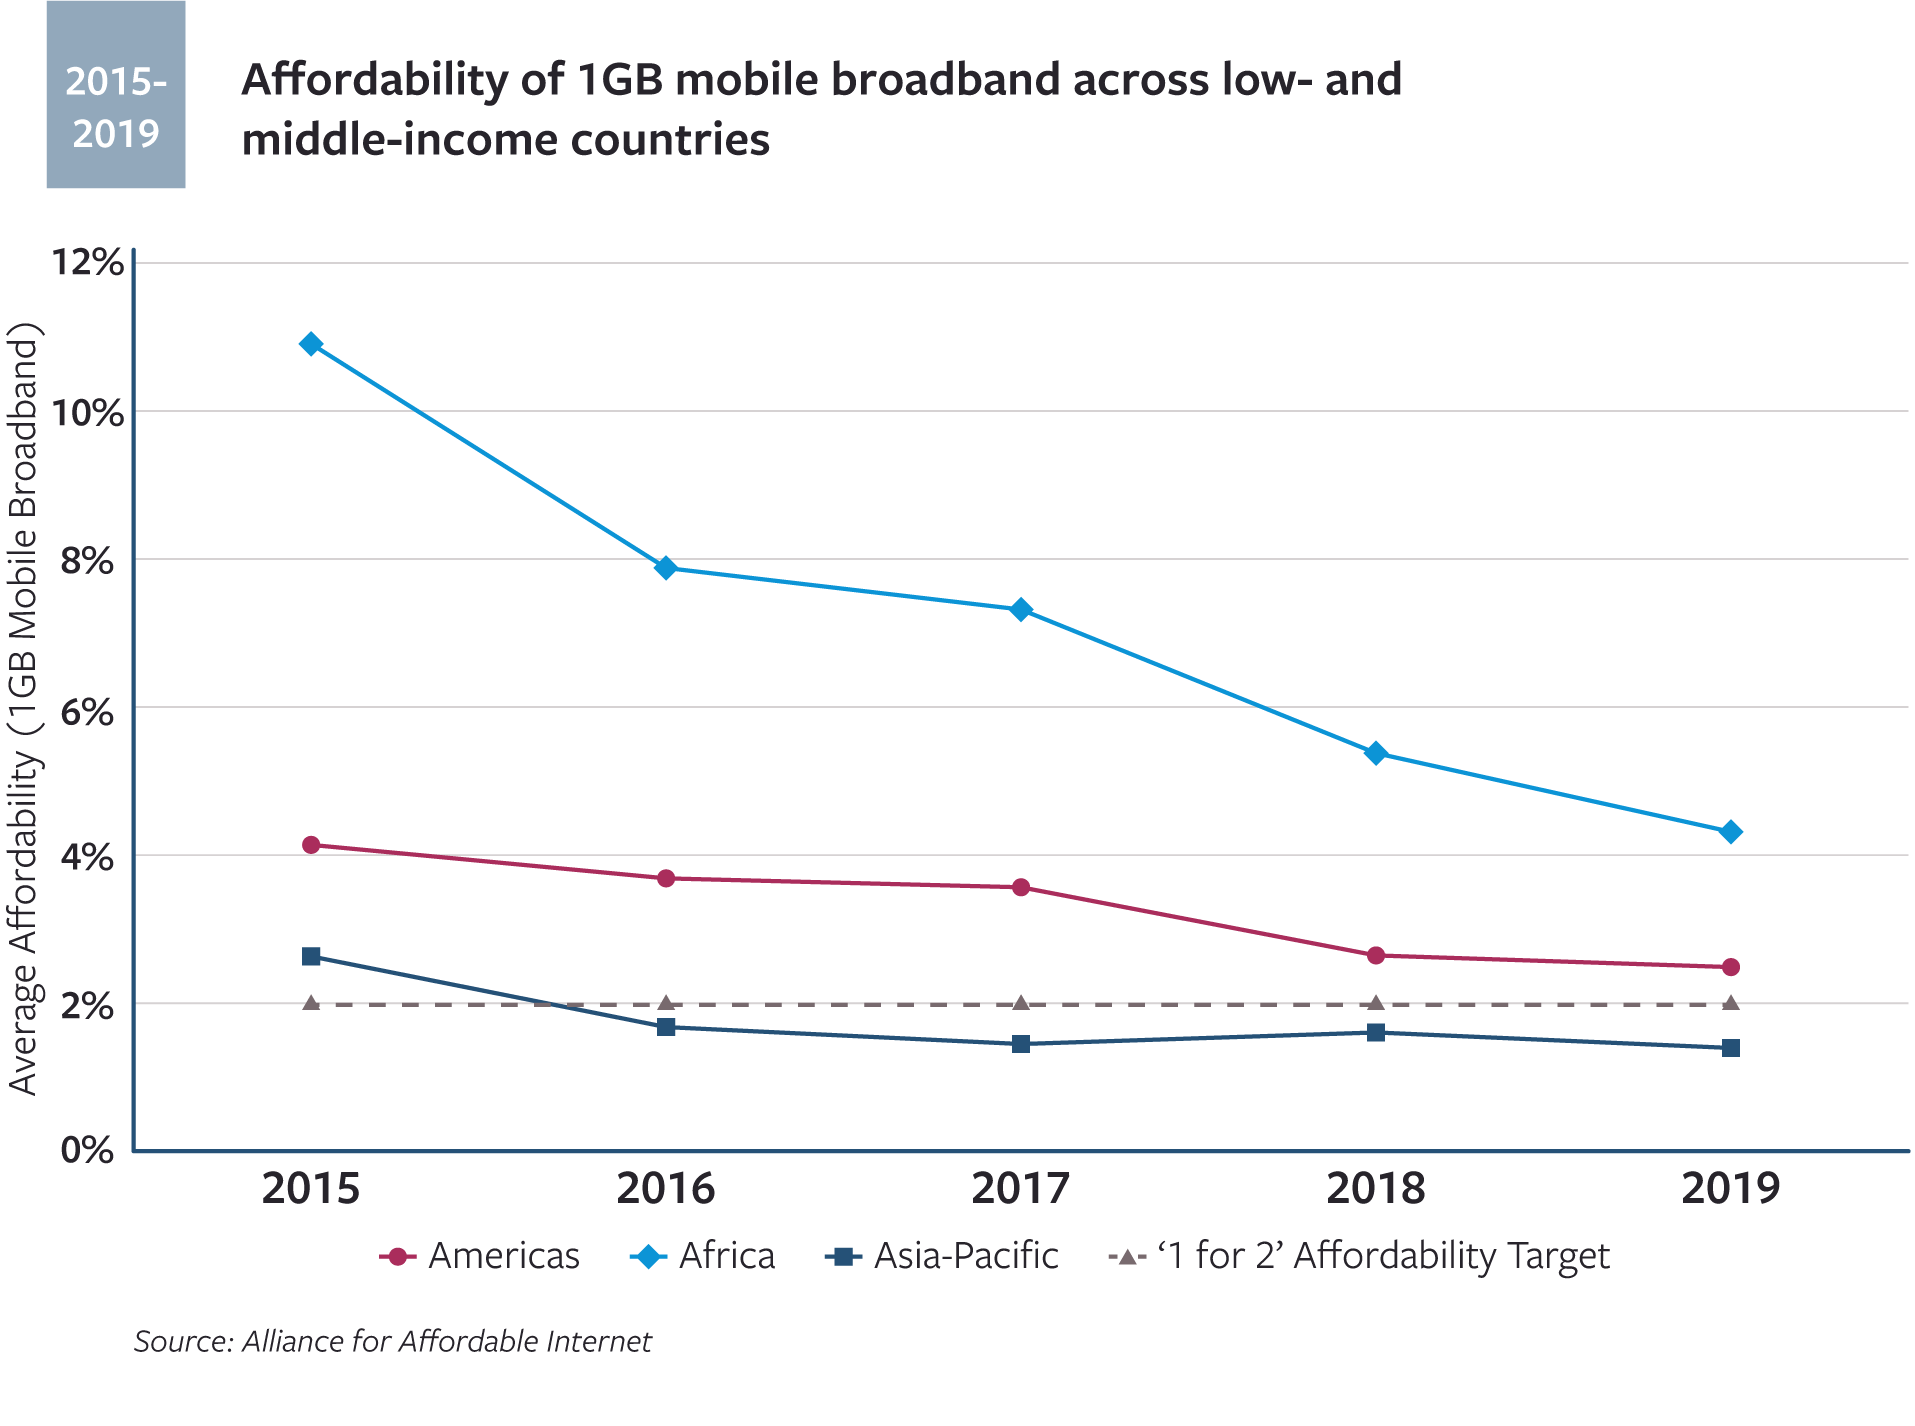 Graph of affordability of 1GB mobile broadband across low- and middle-income countries